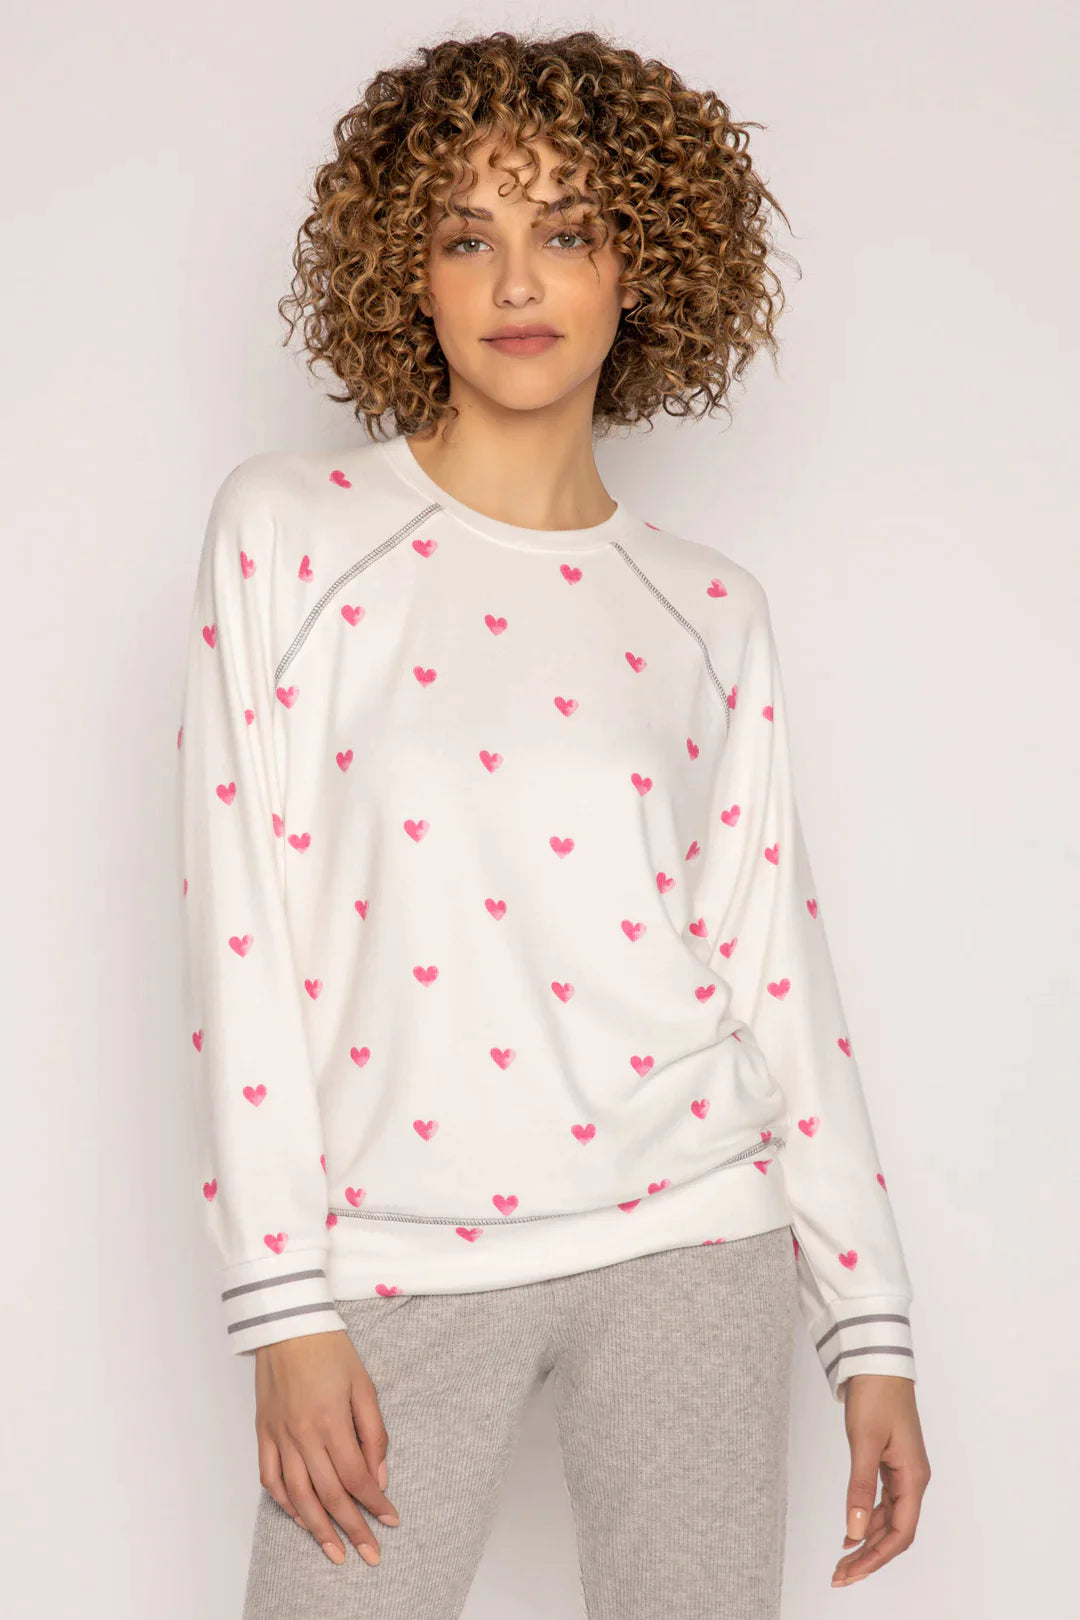 Shop PJ Salvage Bright Stars &amp; Brave Hearts PJ Top - Premium Sweater from PJ Salvage Online now at Spoiled Brat 